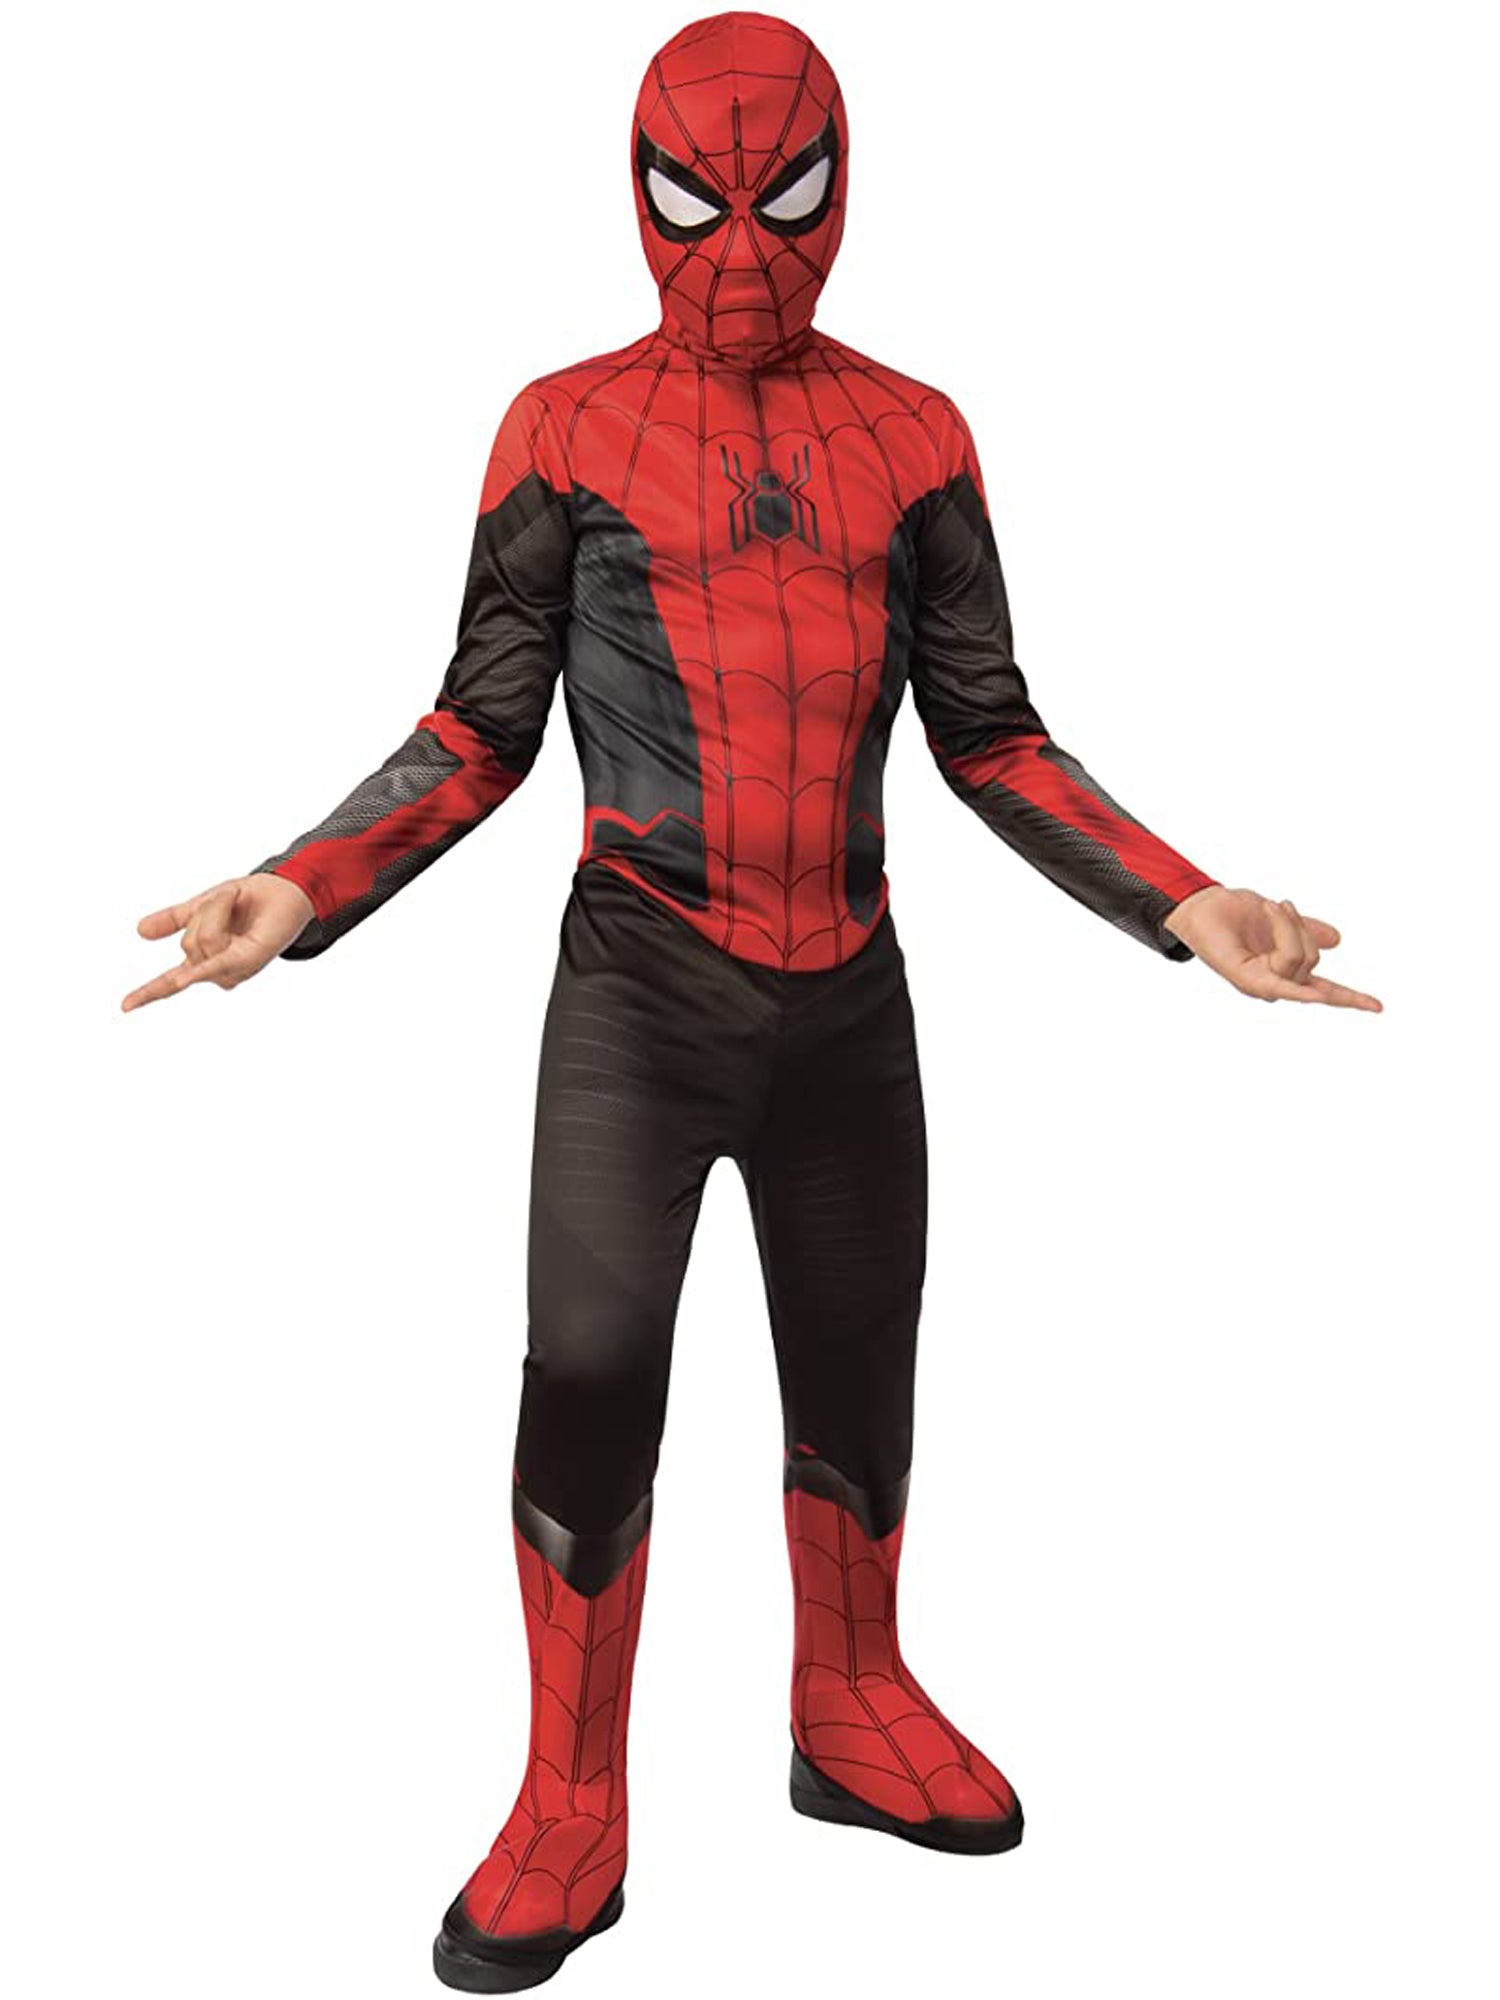 Spider-Man, Spider-Man: No Way Home, Spider-Man: No Way Home, Spider-Man: No Way Home, multi-colored, Marvel, Kids Costumes, Extra Large, Front